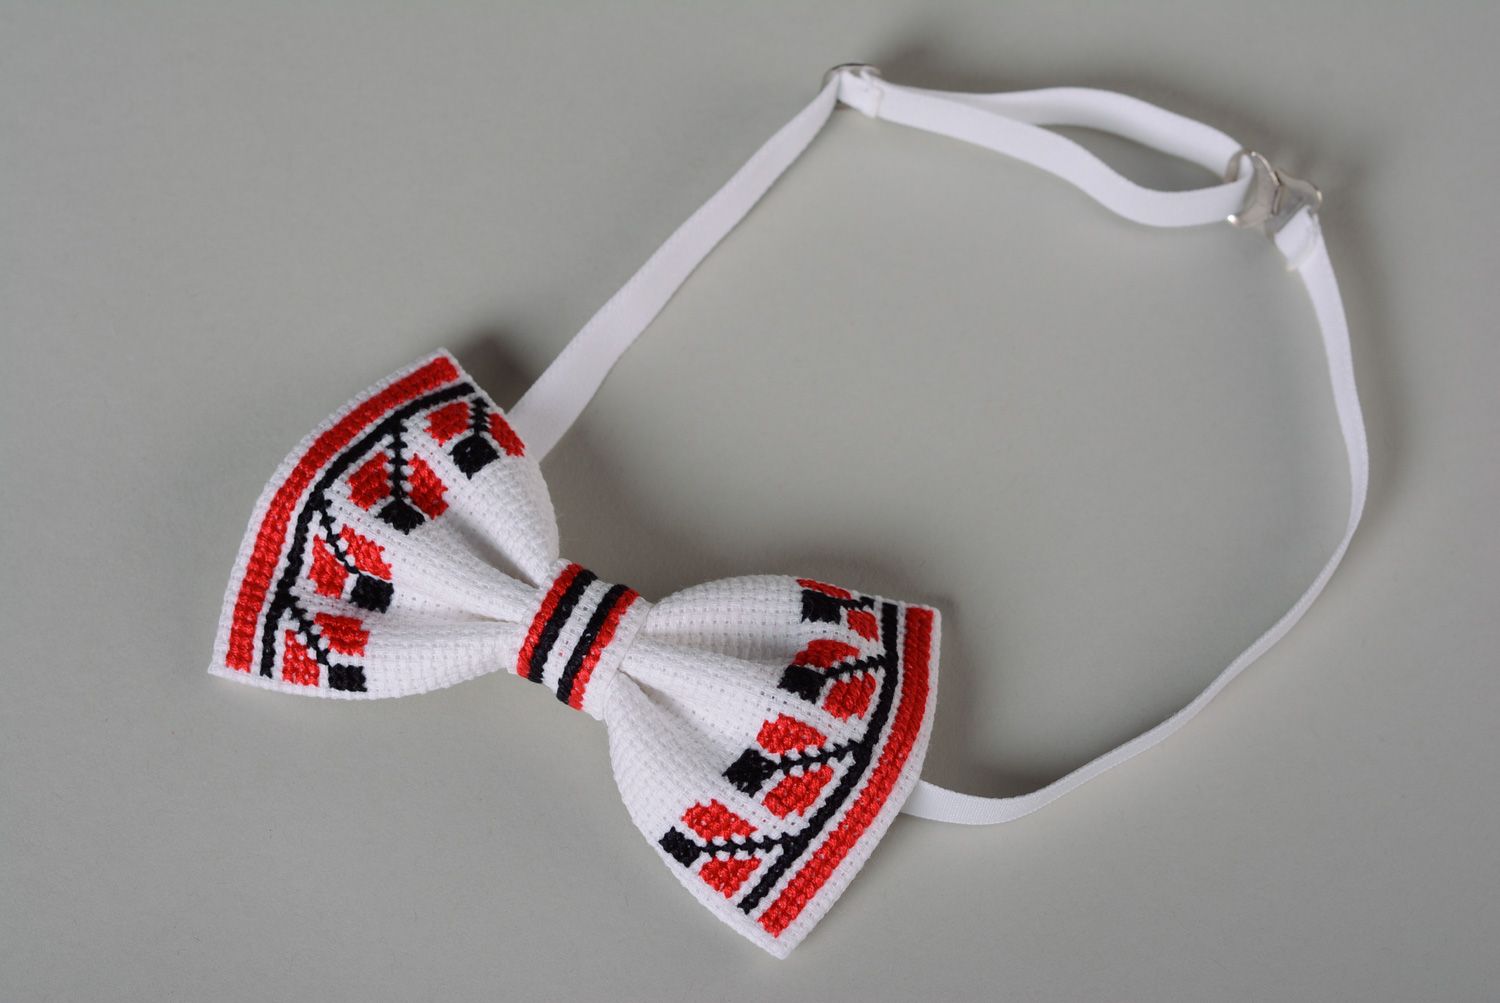 Handmade white festive bow tie with cross stitch embroidery in ethnic style for men photo 2